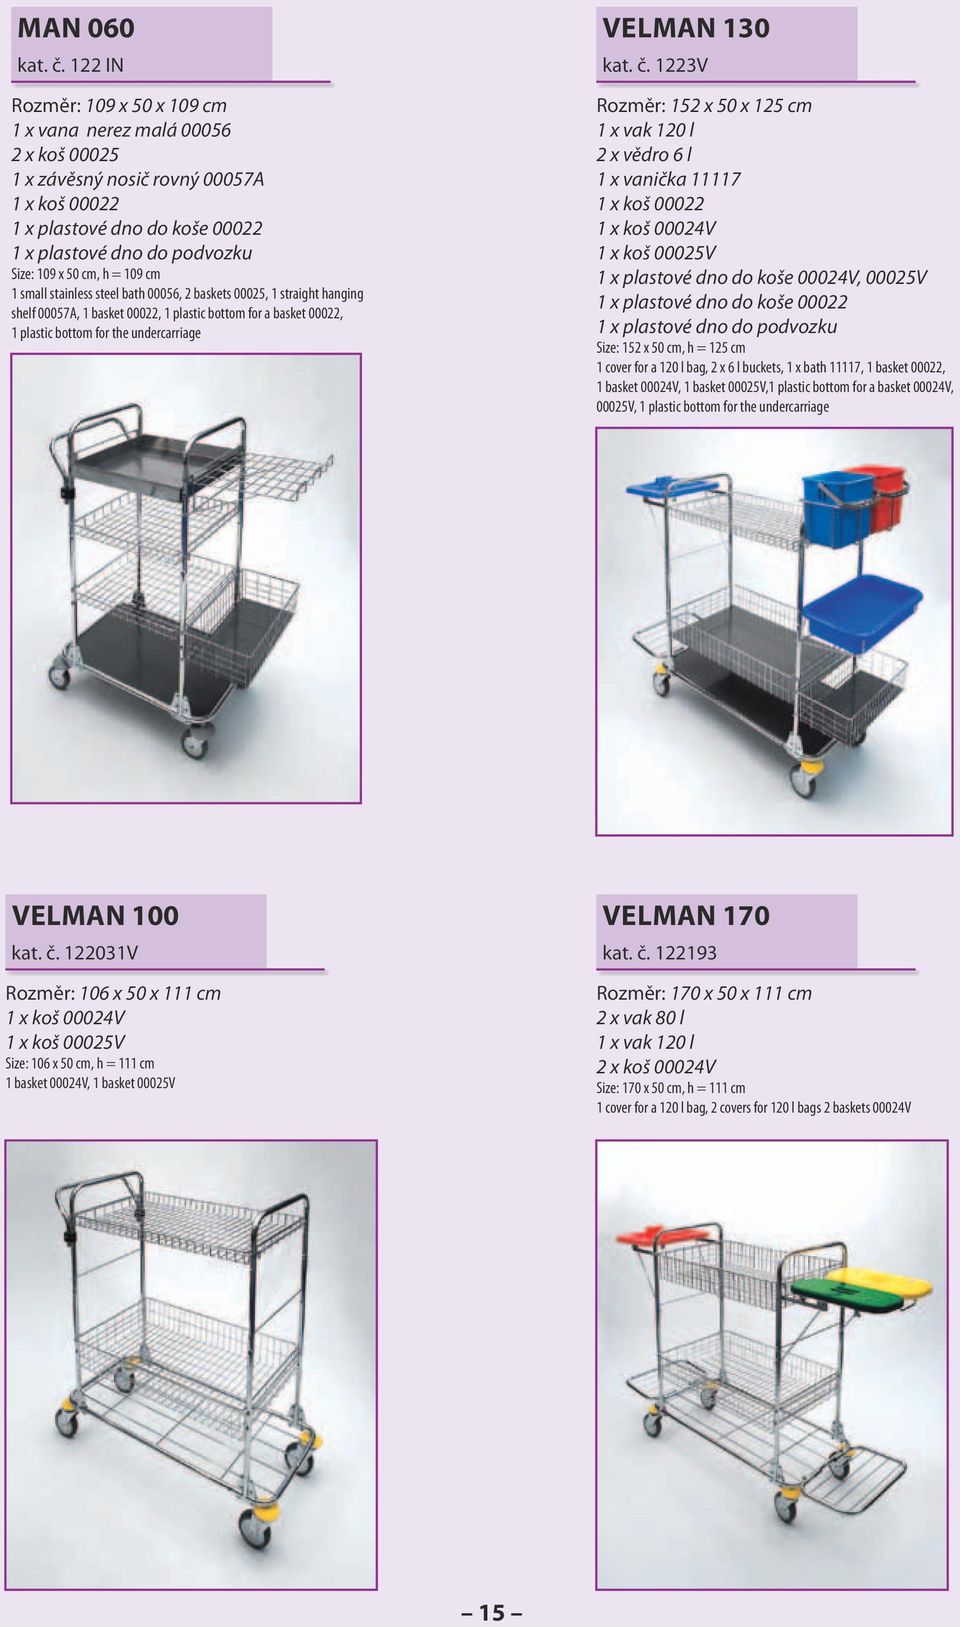 = 109 cm 1 small stainless steel bath 00056, 2 baskets 00025, 1 straight hanging shelf 00057A, 1 basket 00022, 1 plastic bottom for a basket 00022, 1 plastic bottom for the undercarriage velman 130